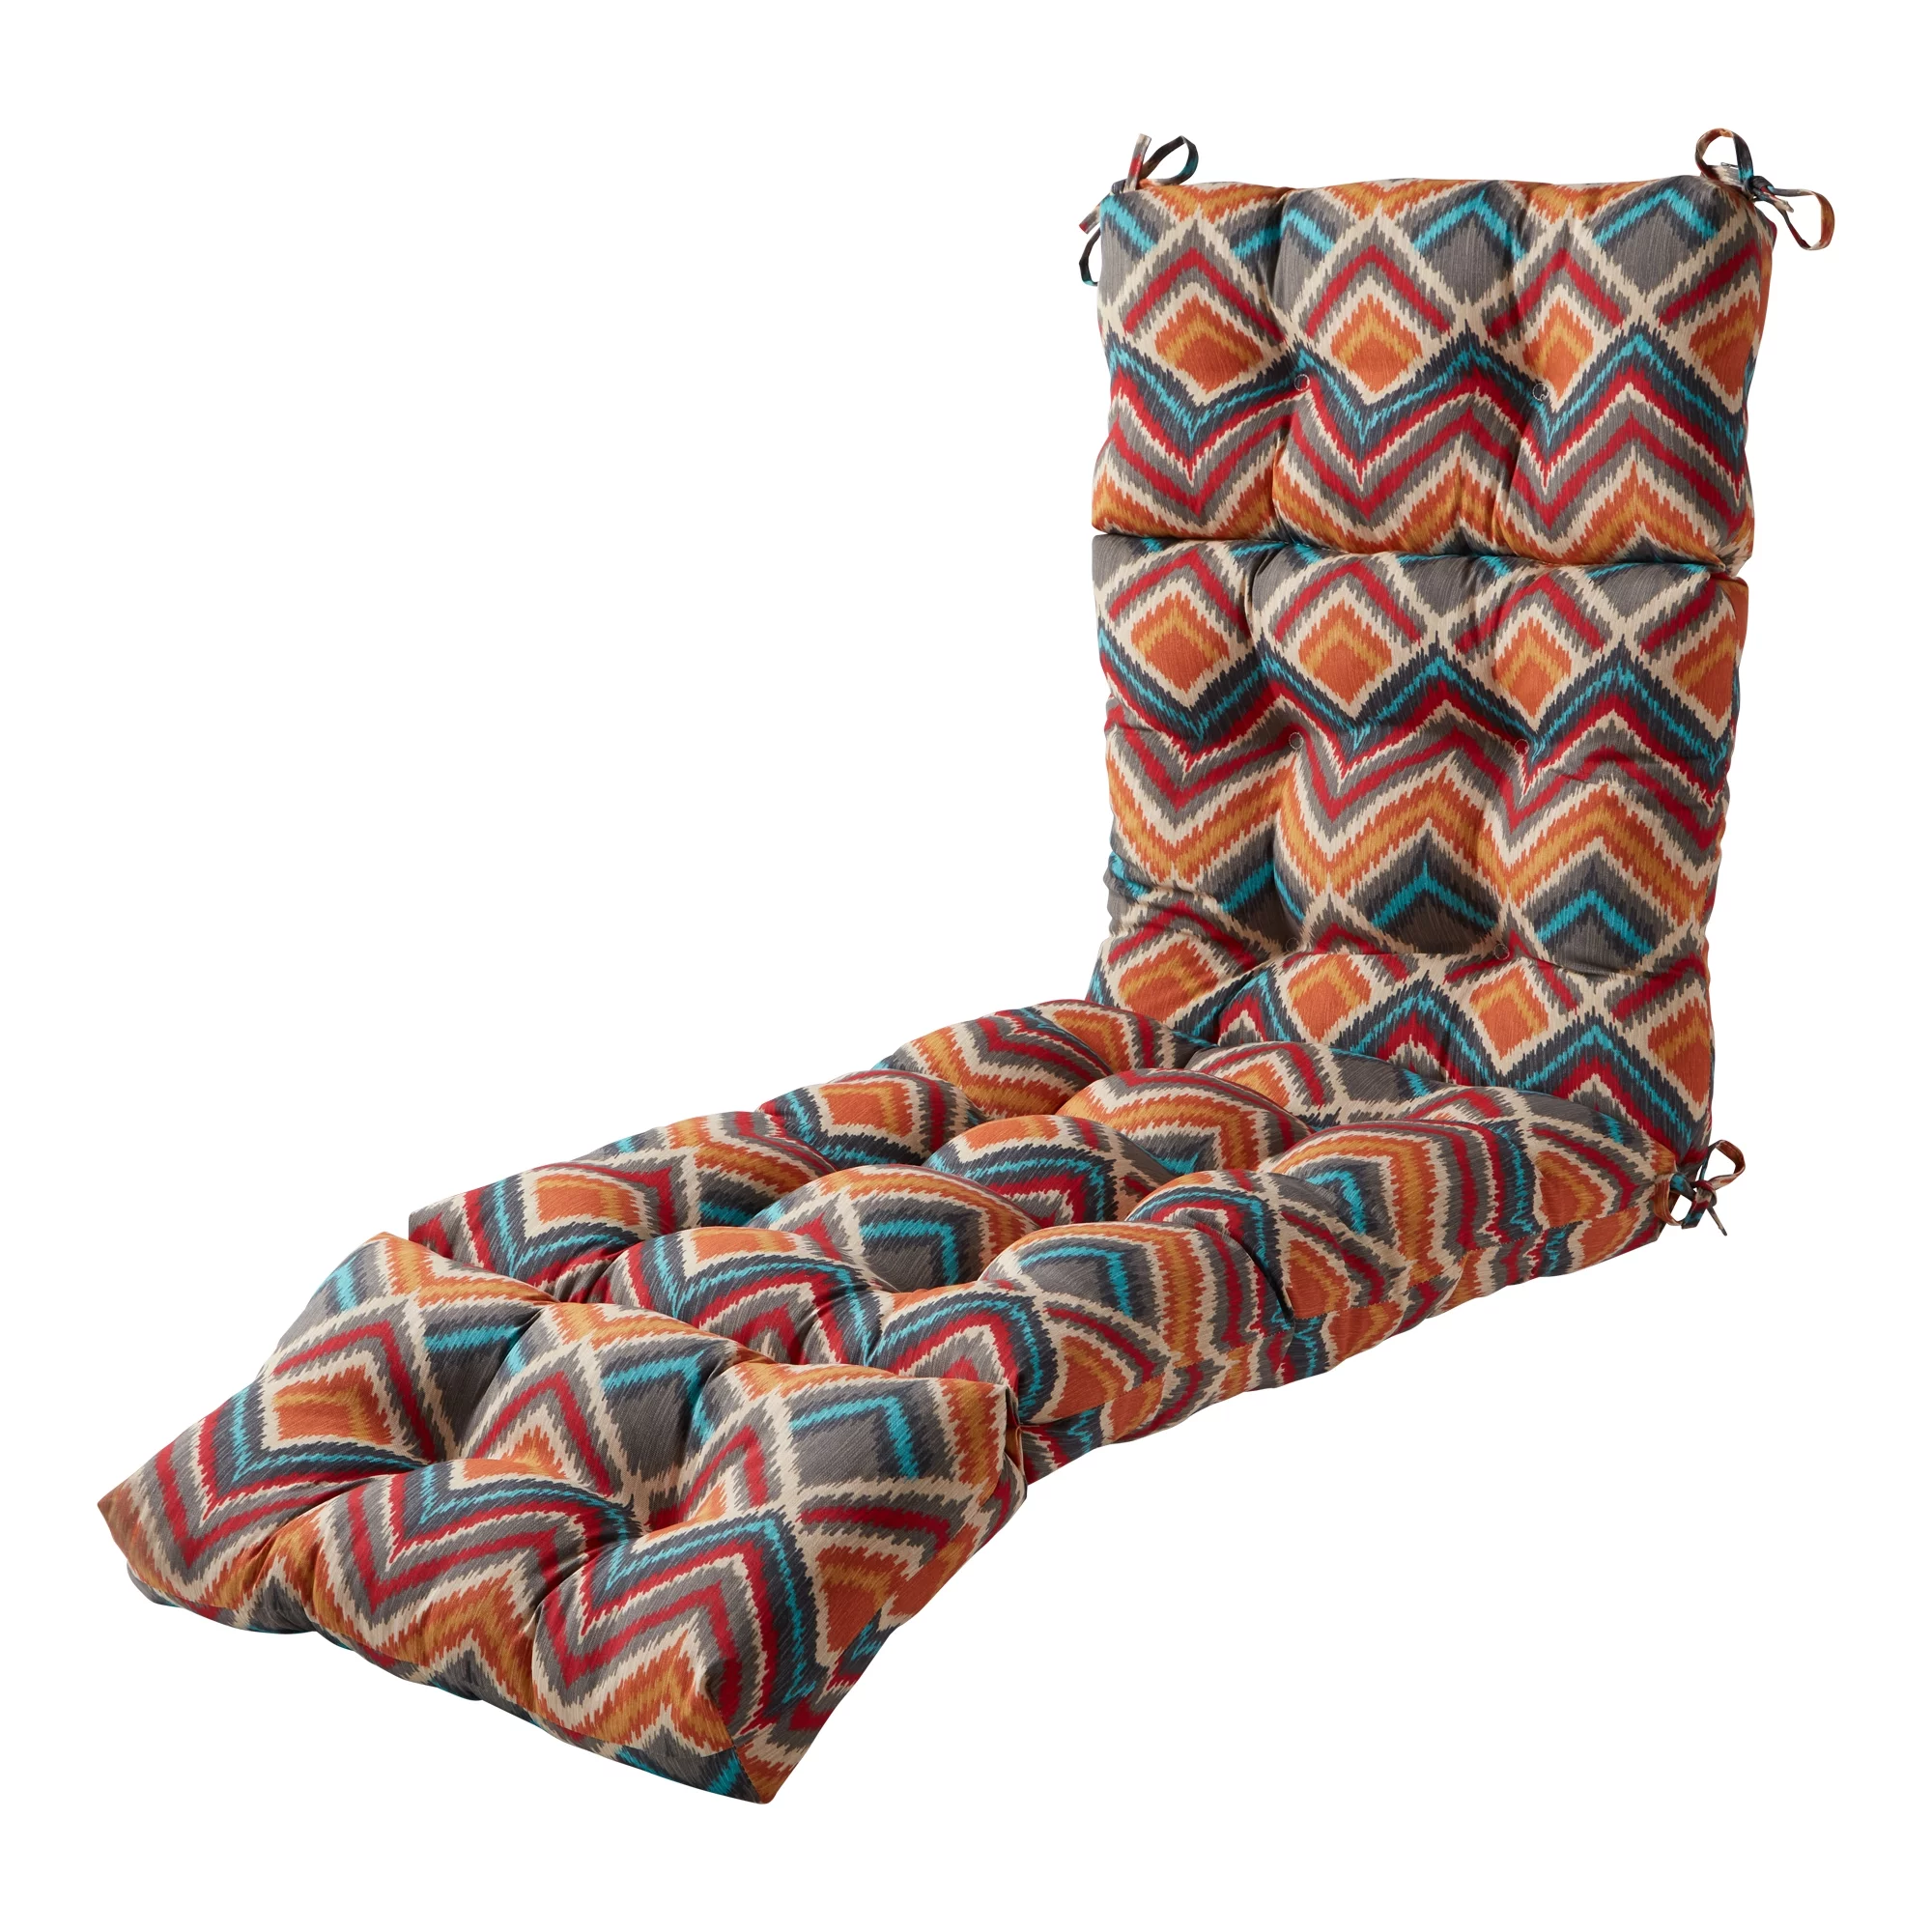 Greendale Home Fashions Surreal 72 x 22 in. Outdoor Chaise Lounge Chair Cushion